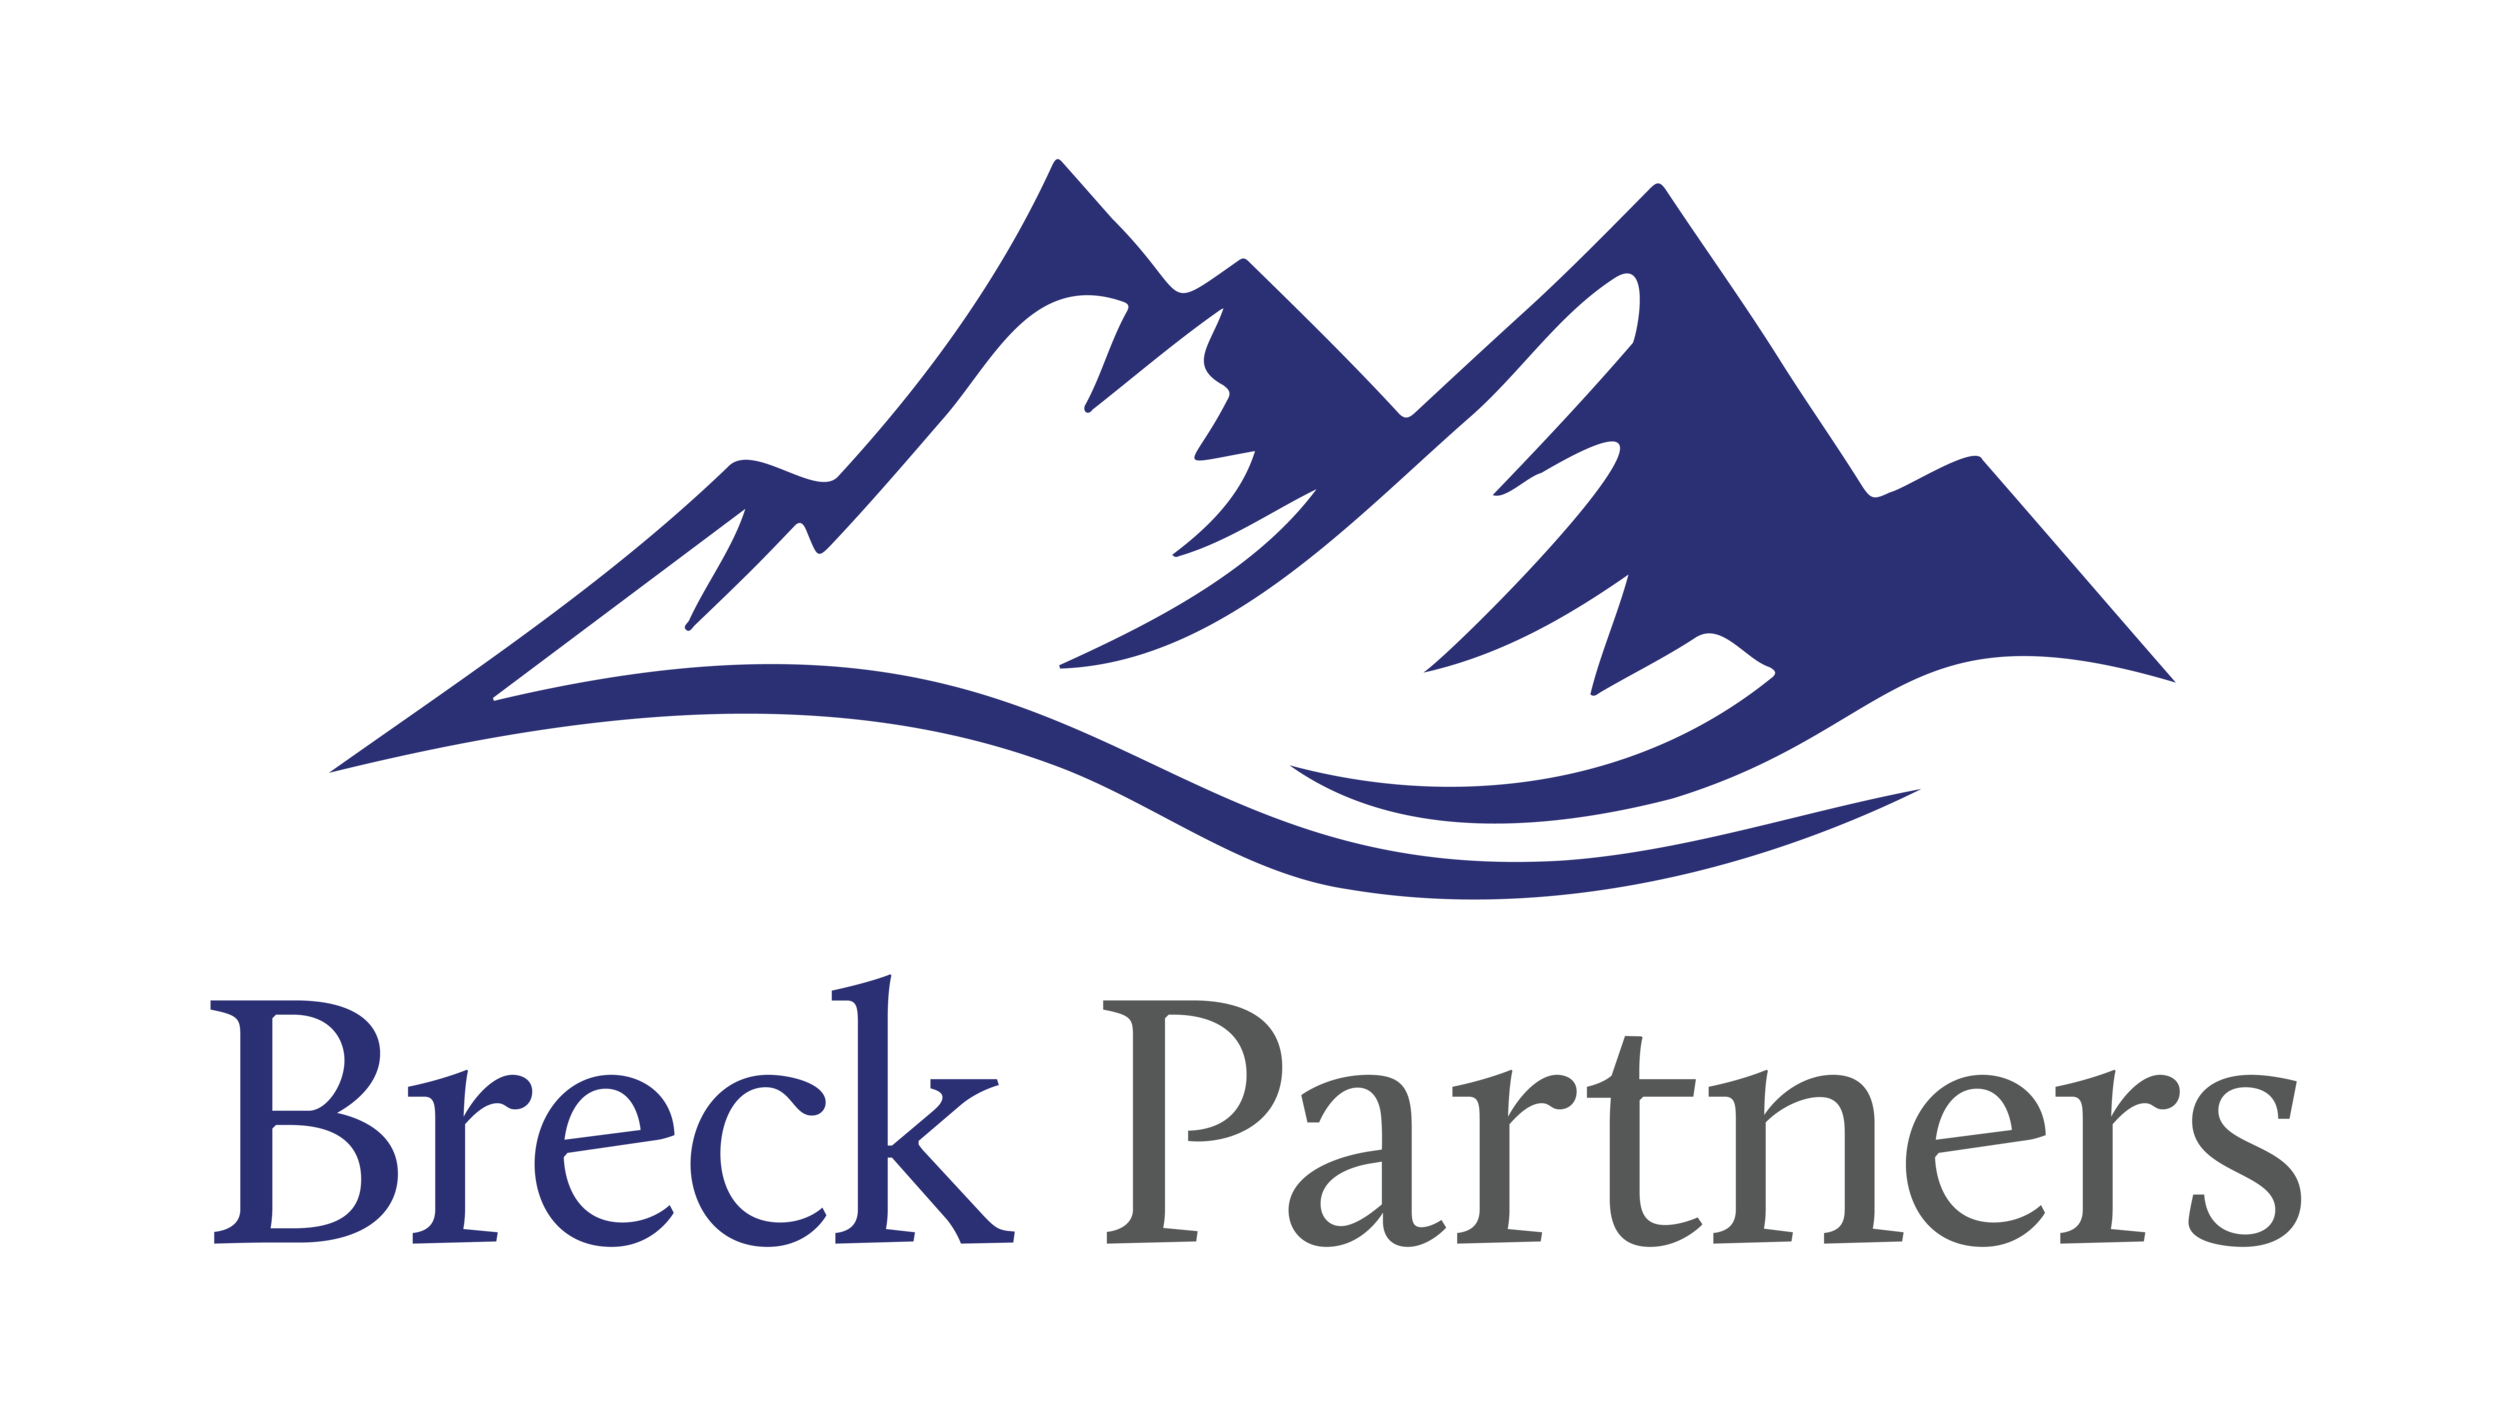 Breck Partners